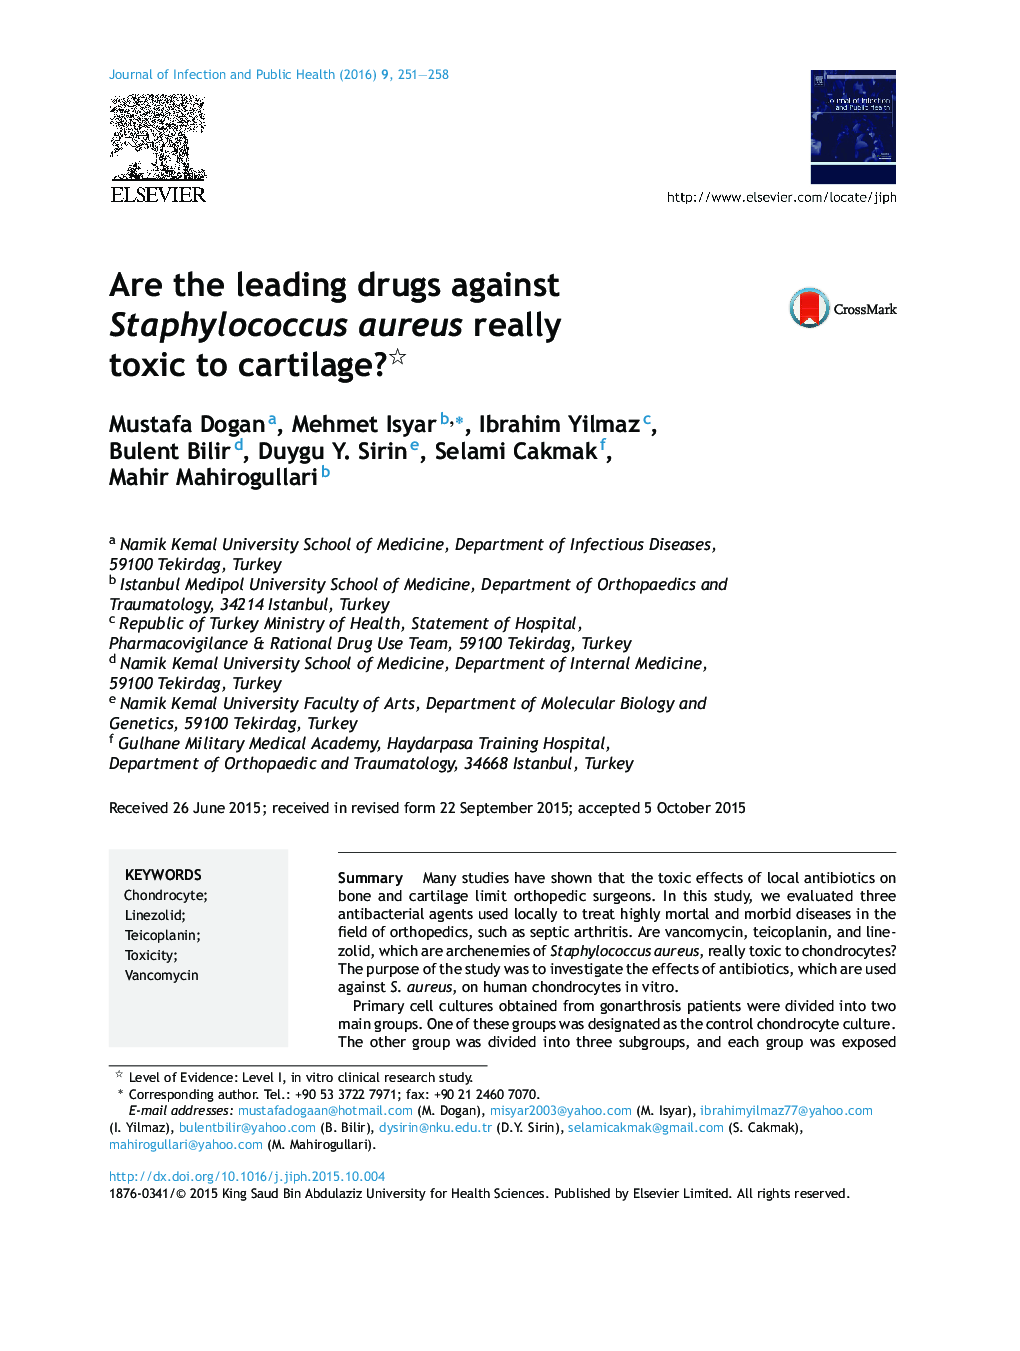 Are the leading drugs against Staphylococcus aureus really toxic to cartilage? 